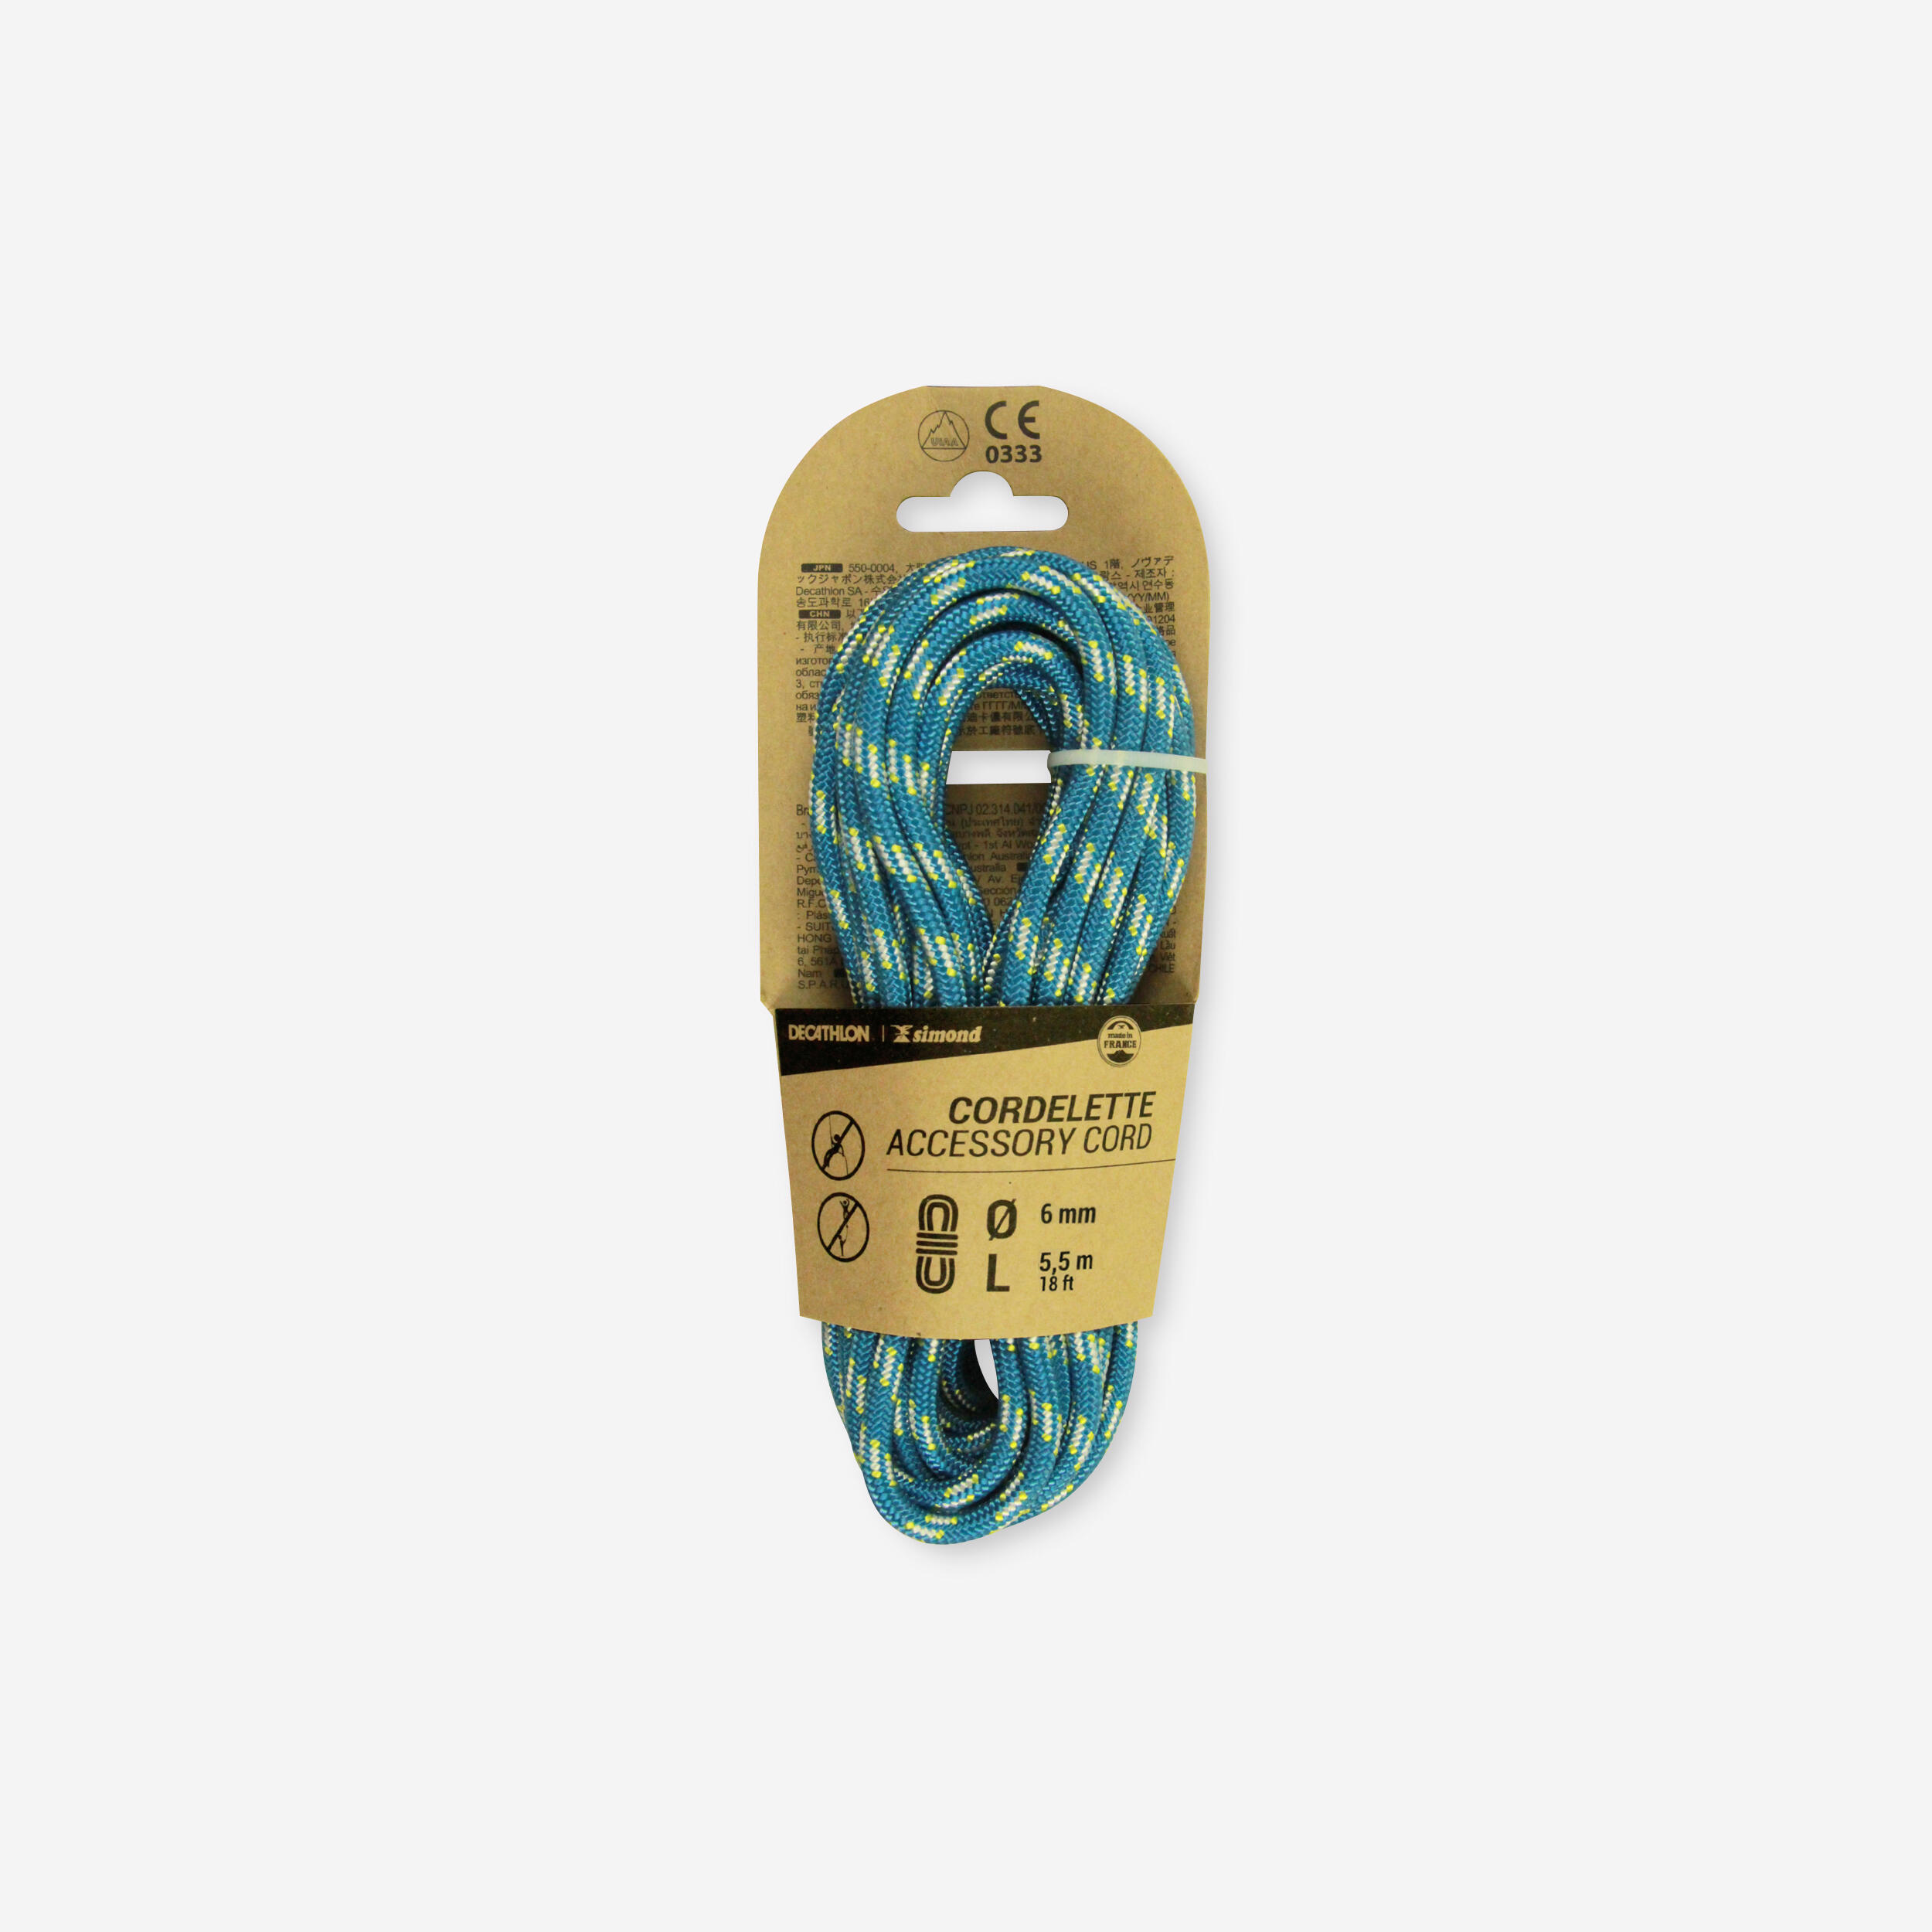 Climbing and mountaineering cord 6 mm x 5.5 m